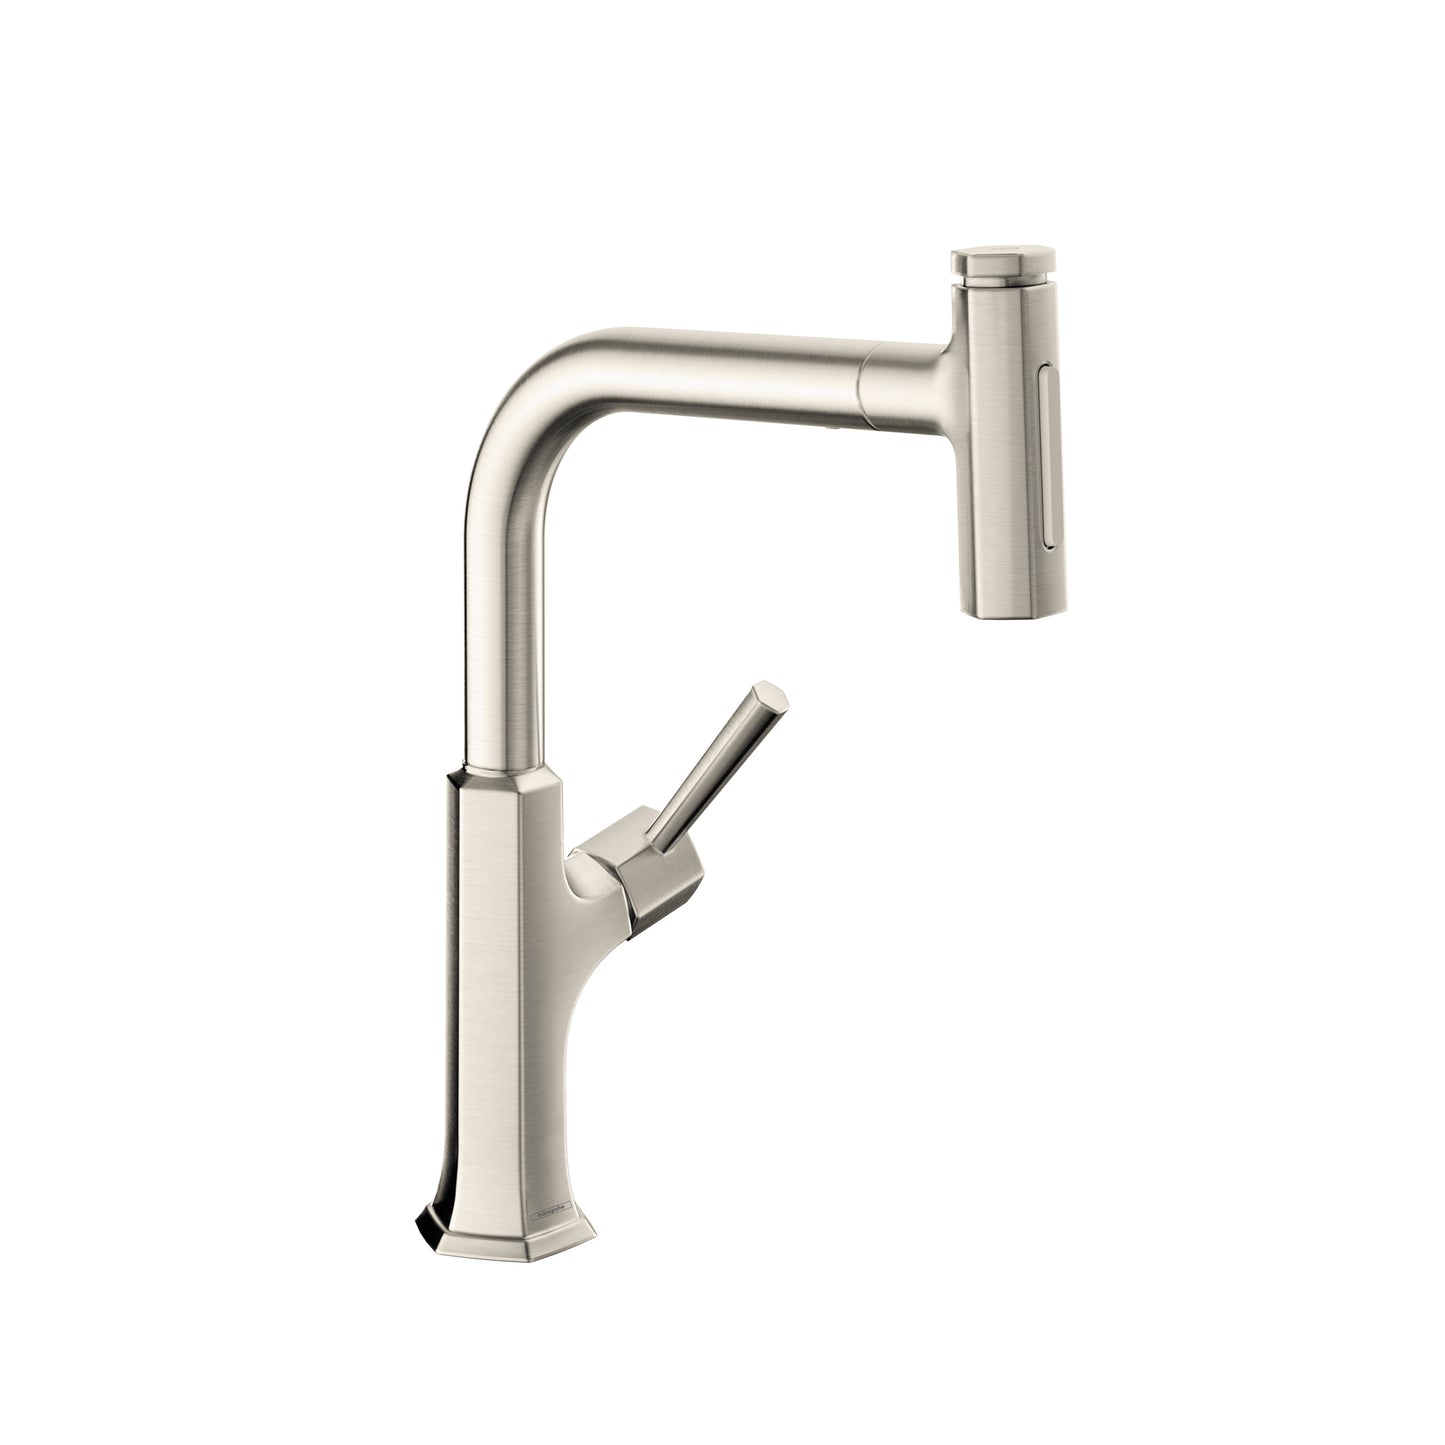 HANSGROHE 04828800 Brushed Nickel Locarno Transitional Kitchen Faucet 1.75 GPM